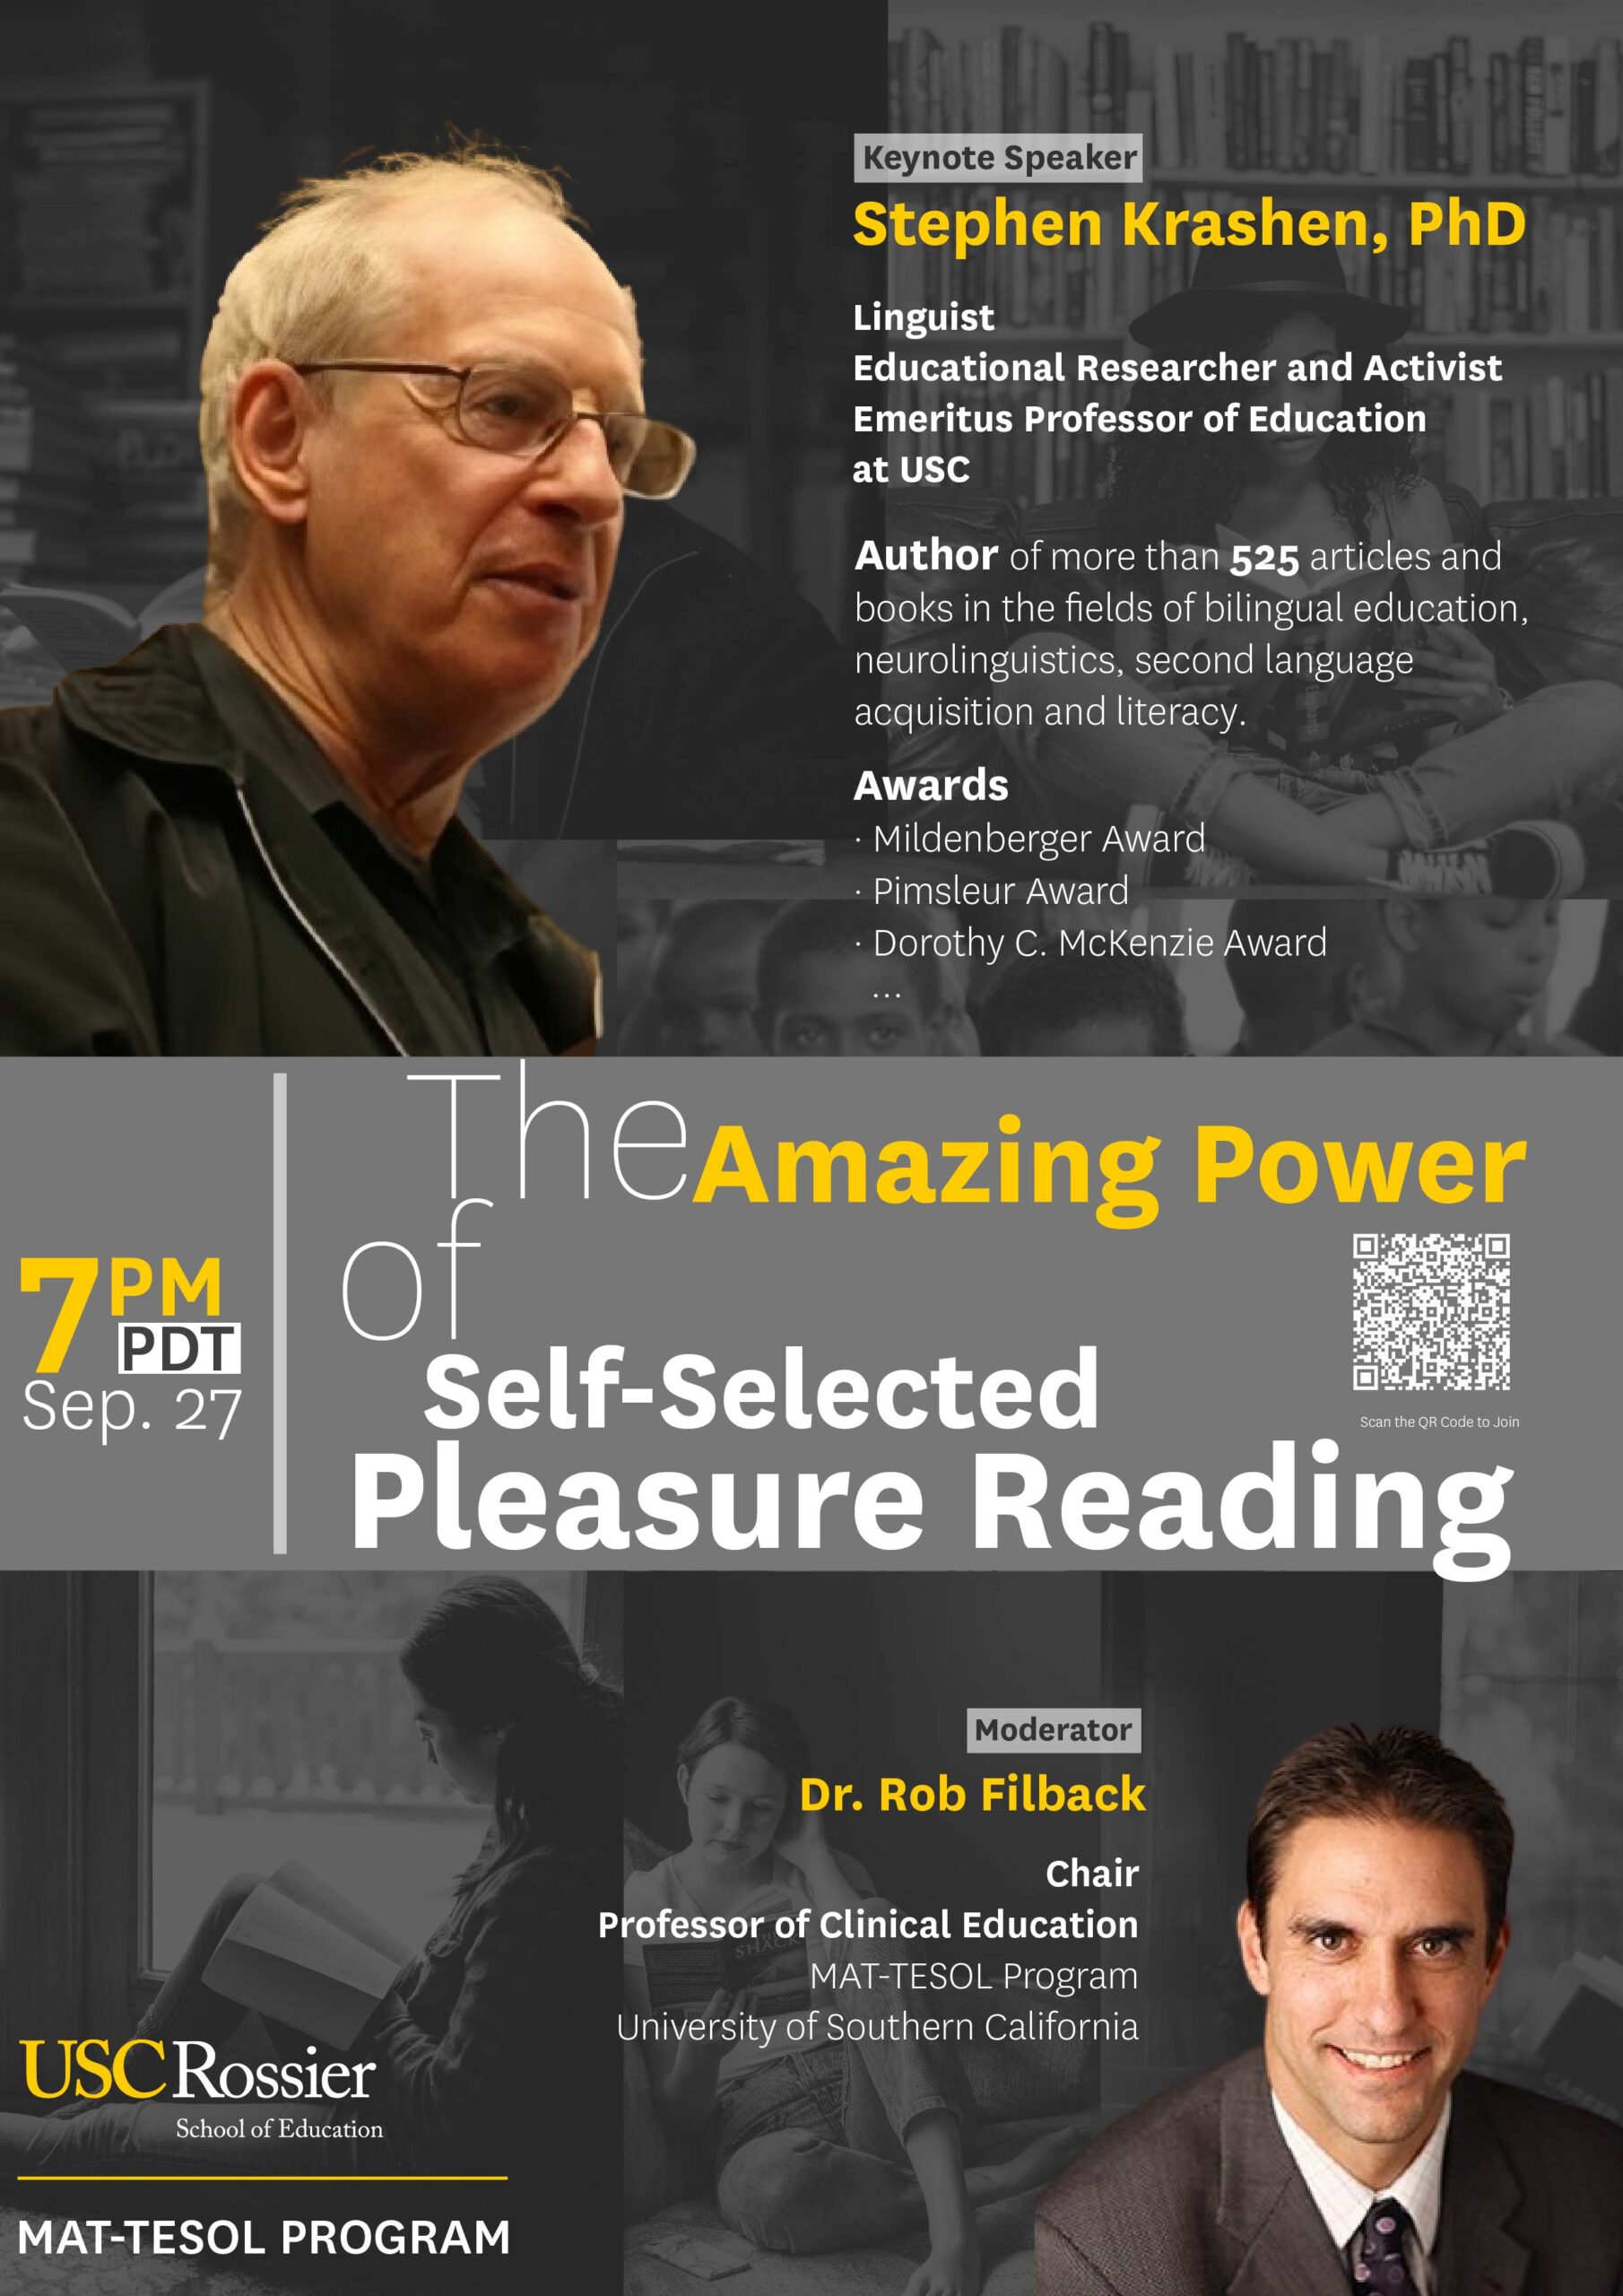 The Amazing Power of Self-Selected Pleasure Reading